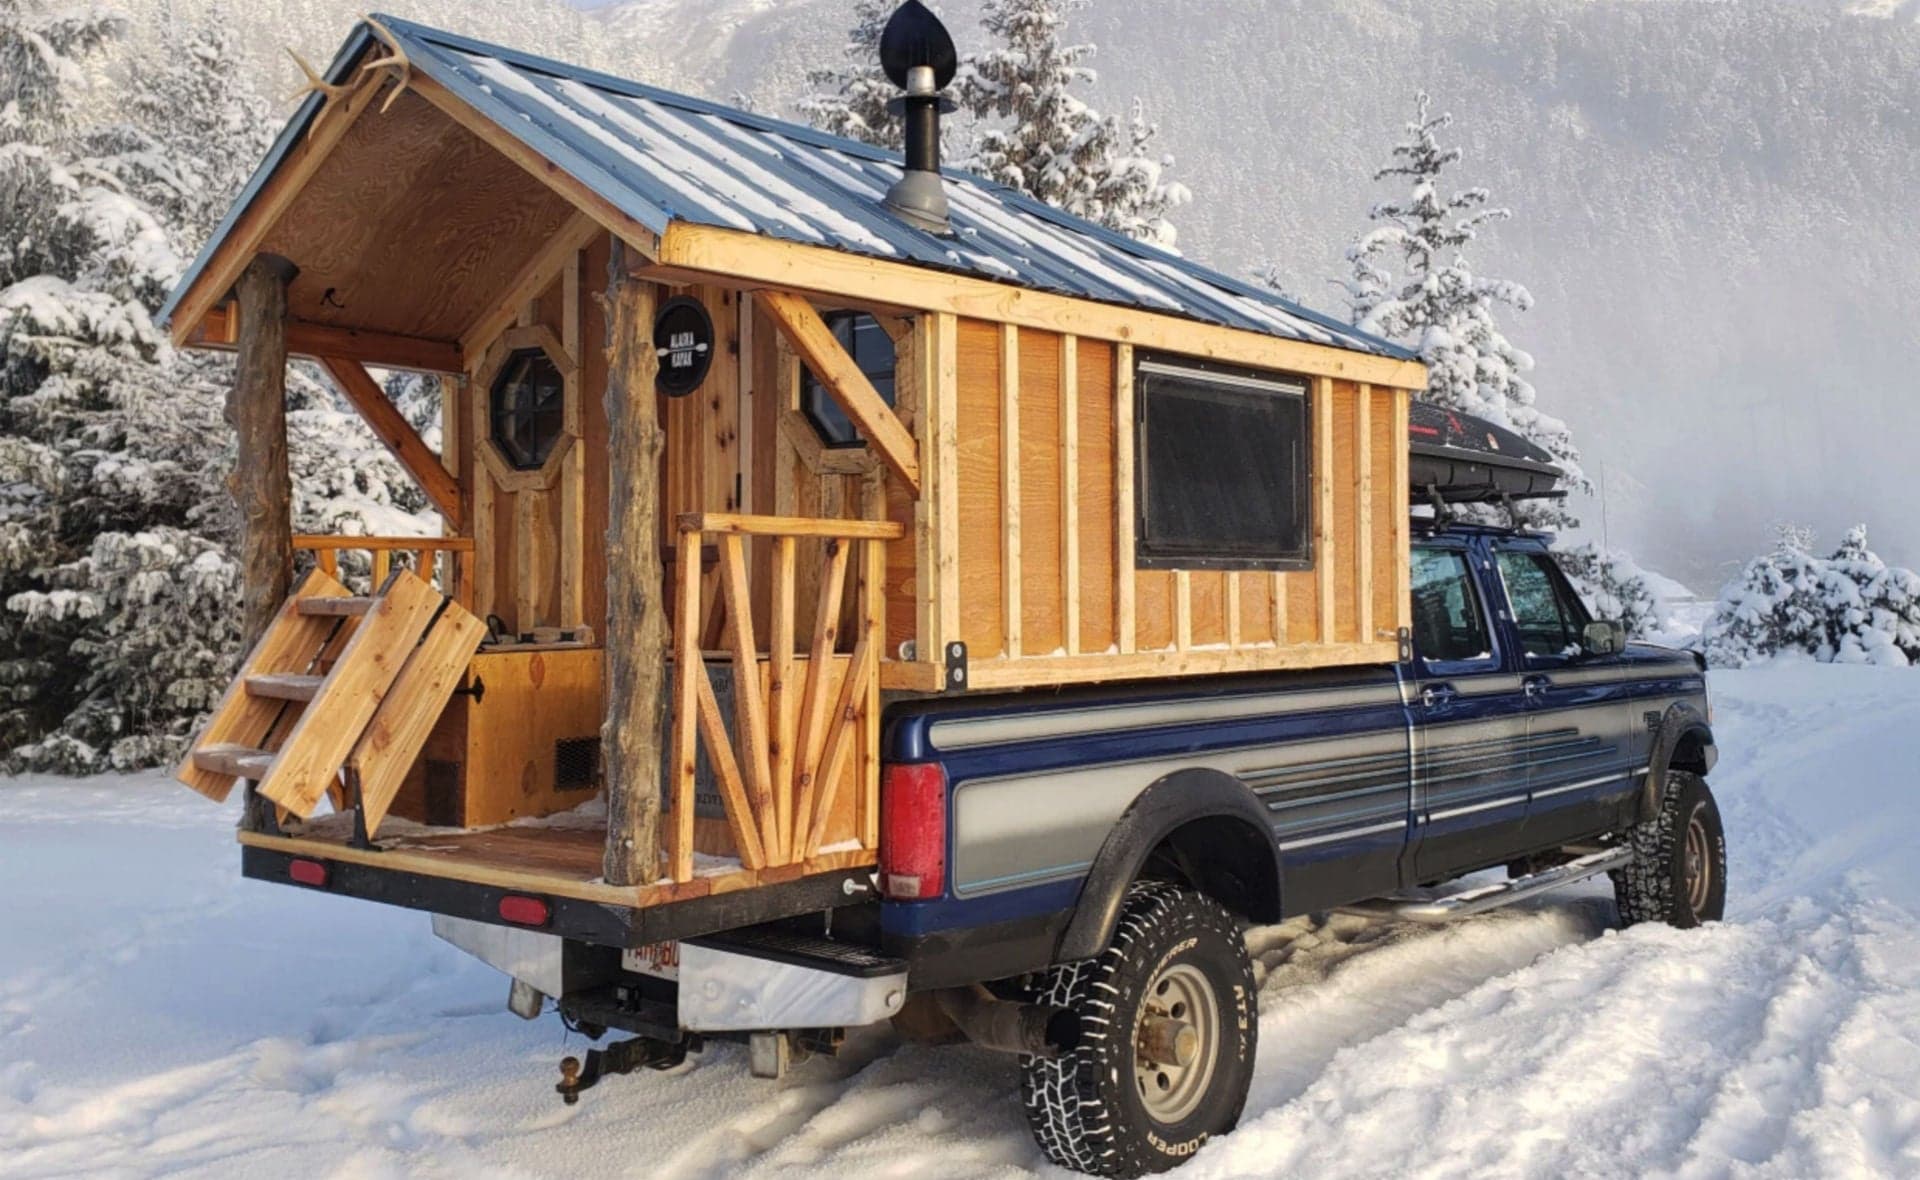 Alaskan Pioneer Builds Rolling Log Cabin on a 1996 Ford F-350